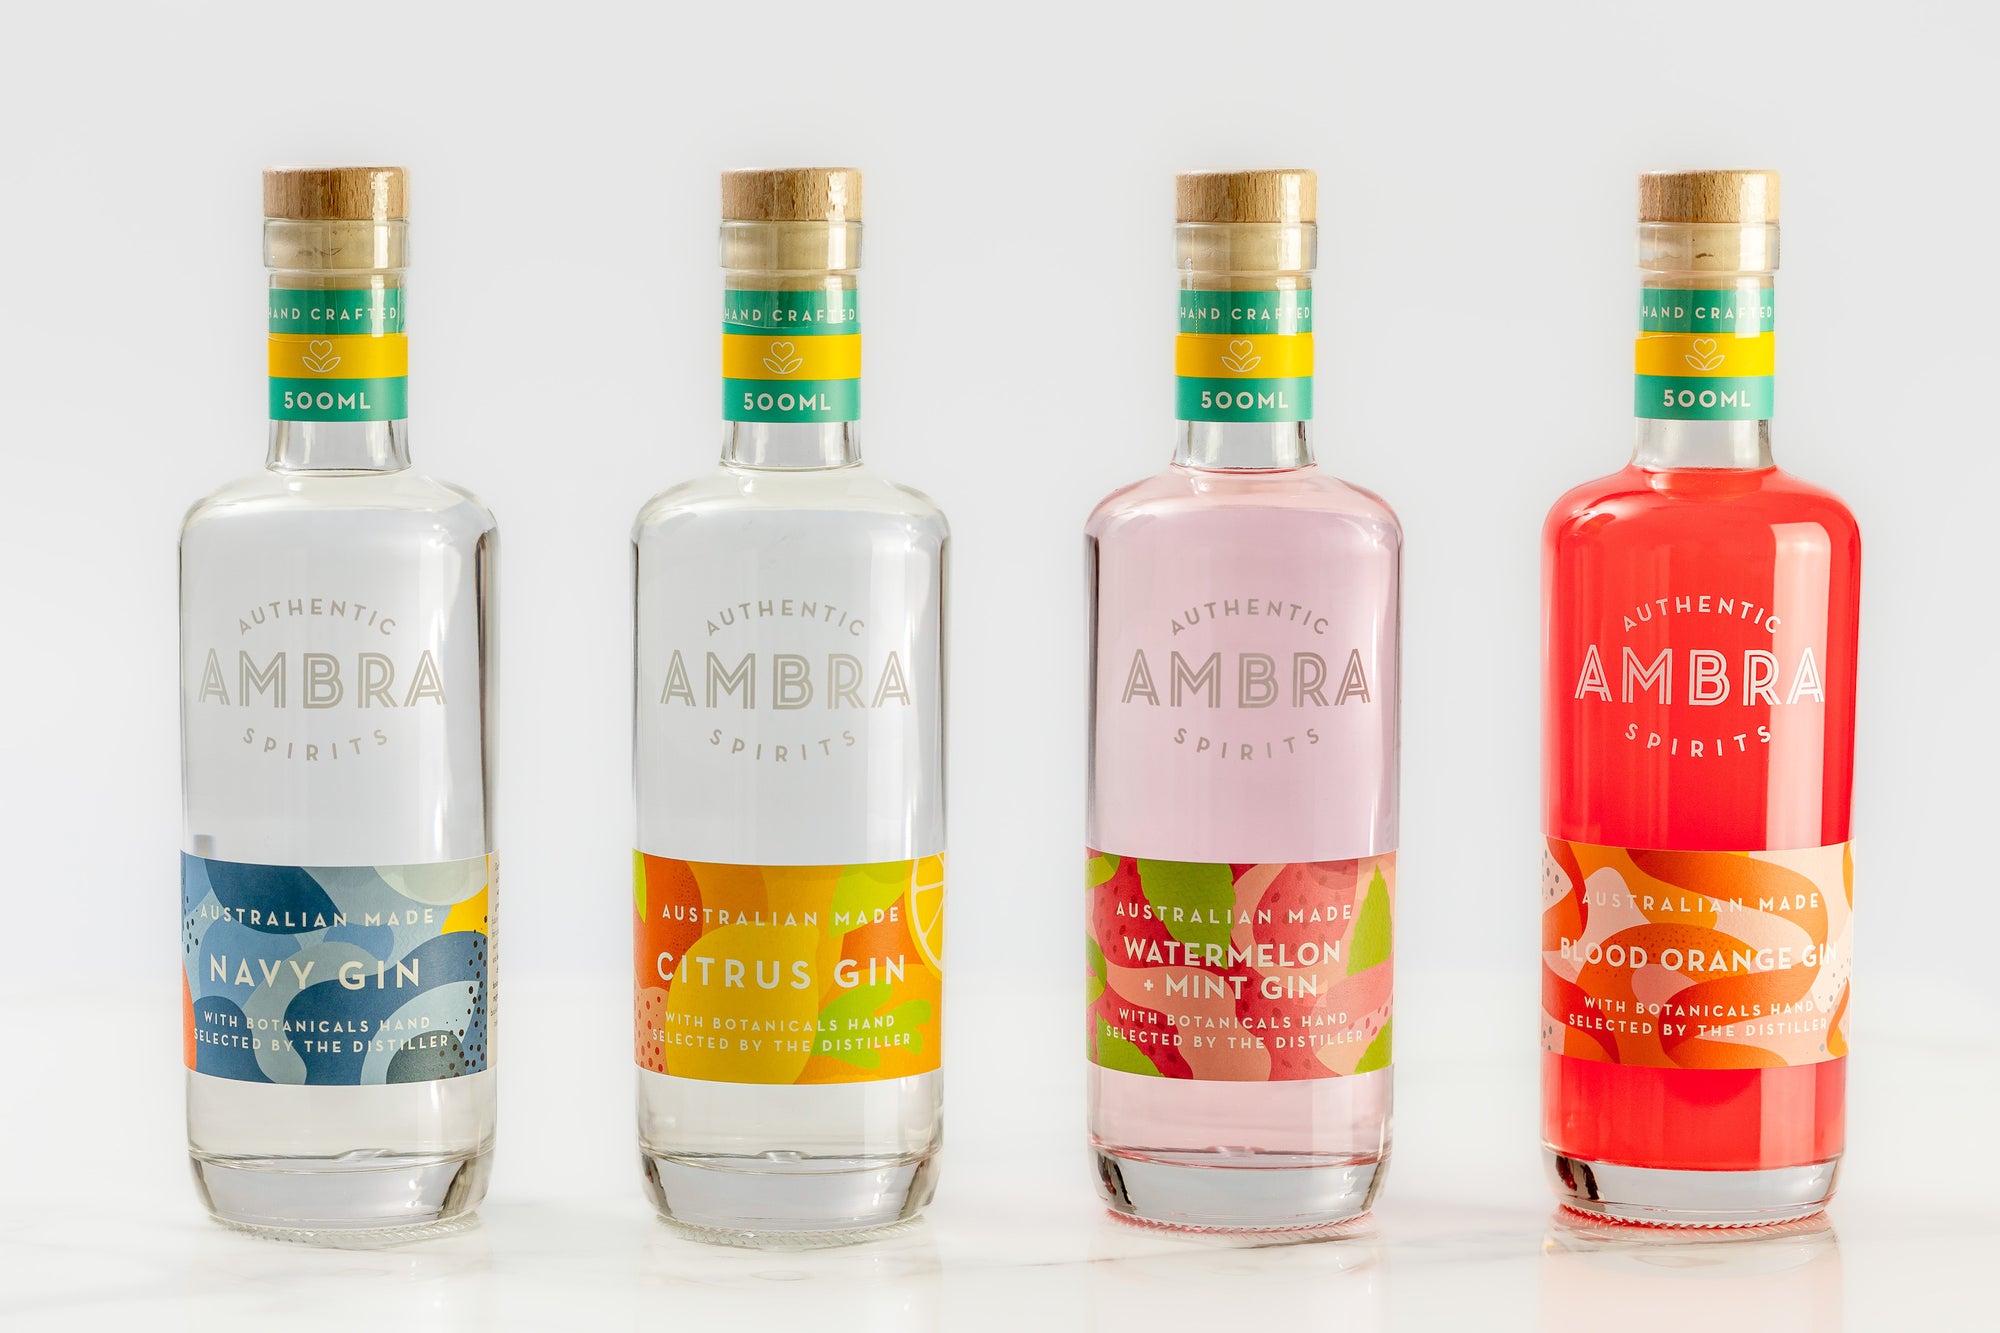 INTRODUCING OUR NEW GIN RANGE!